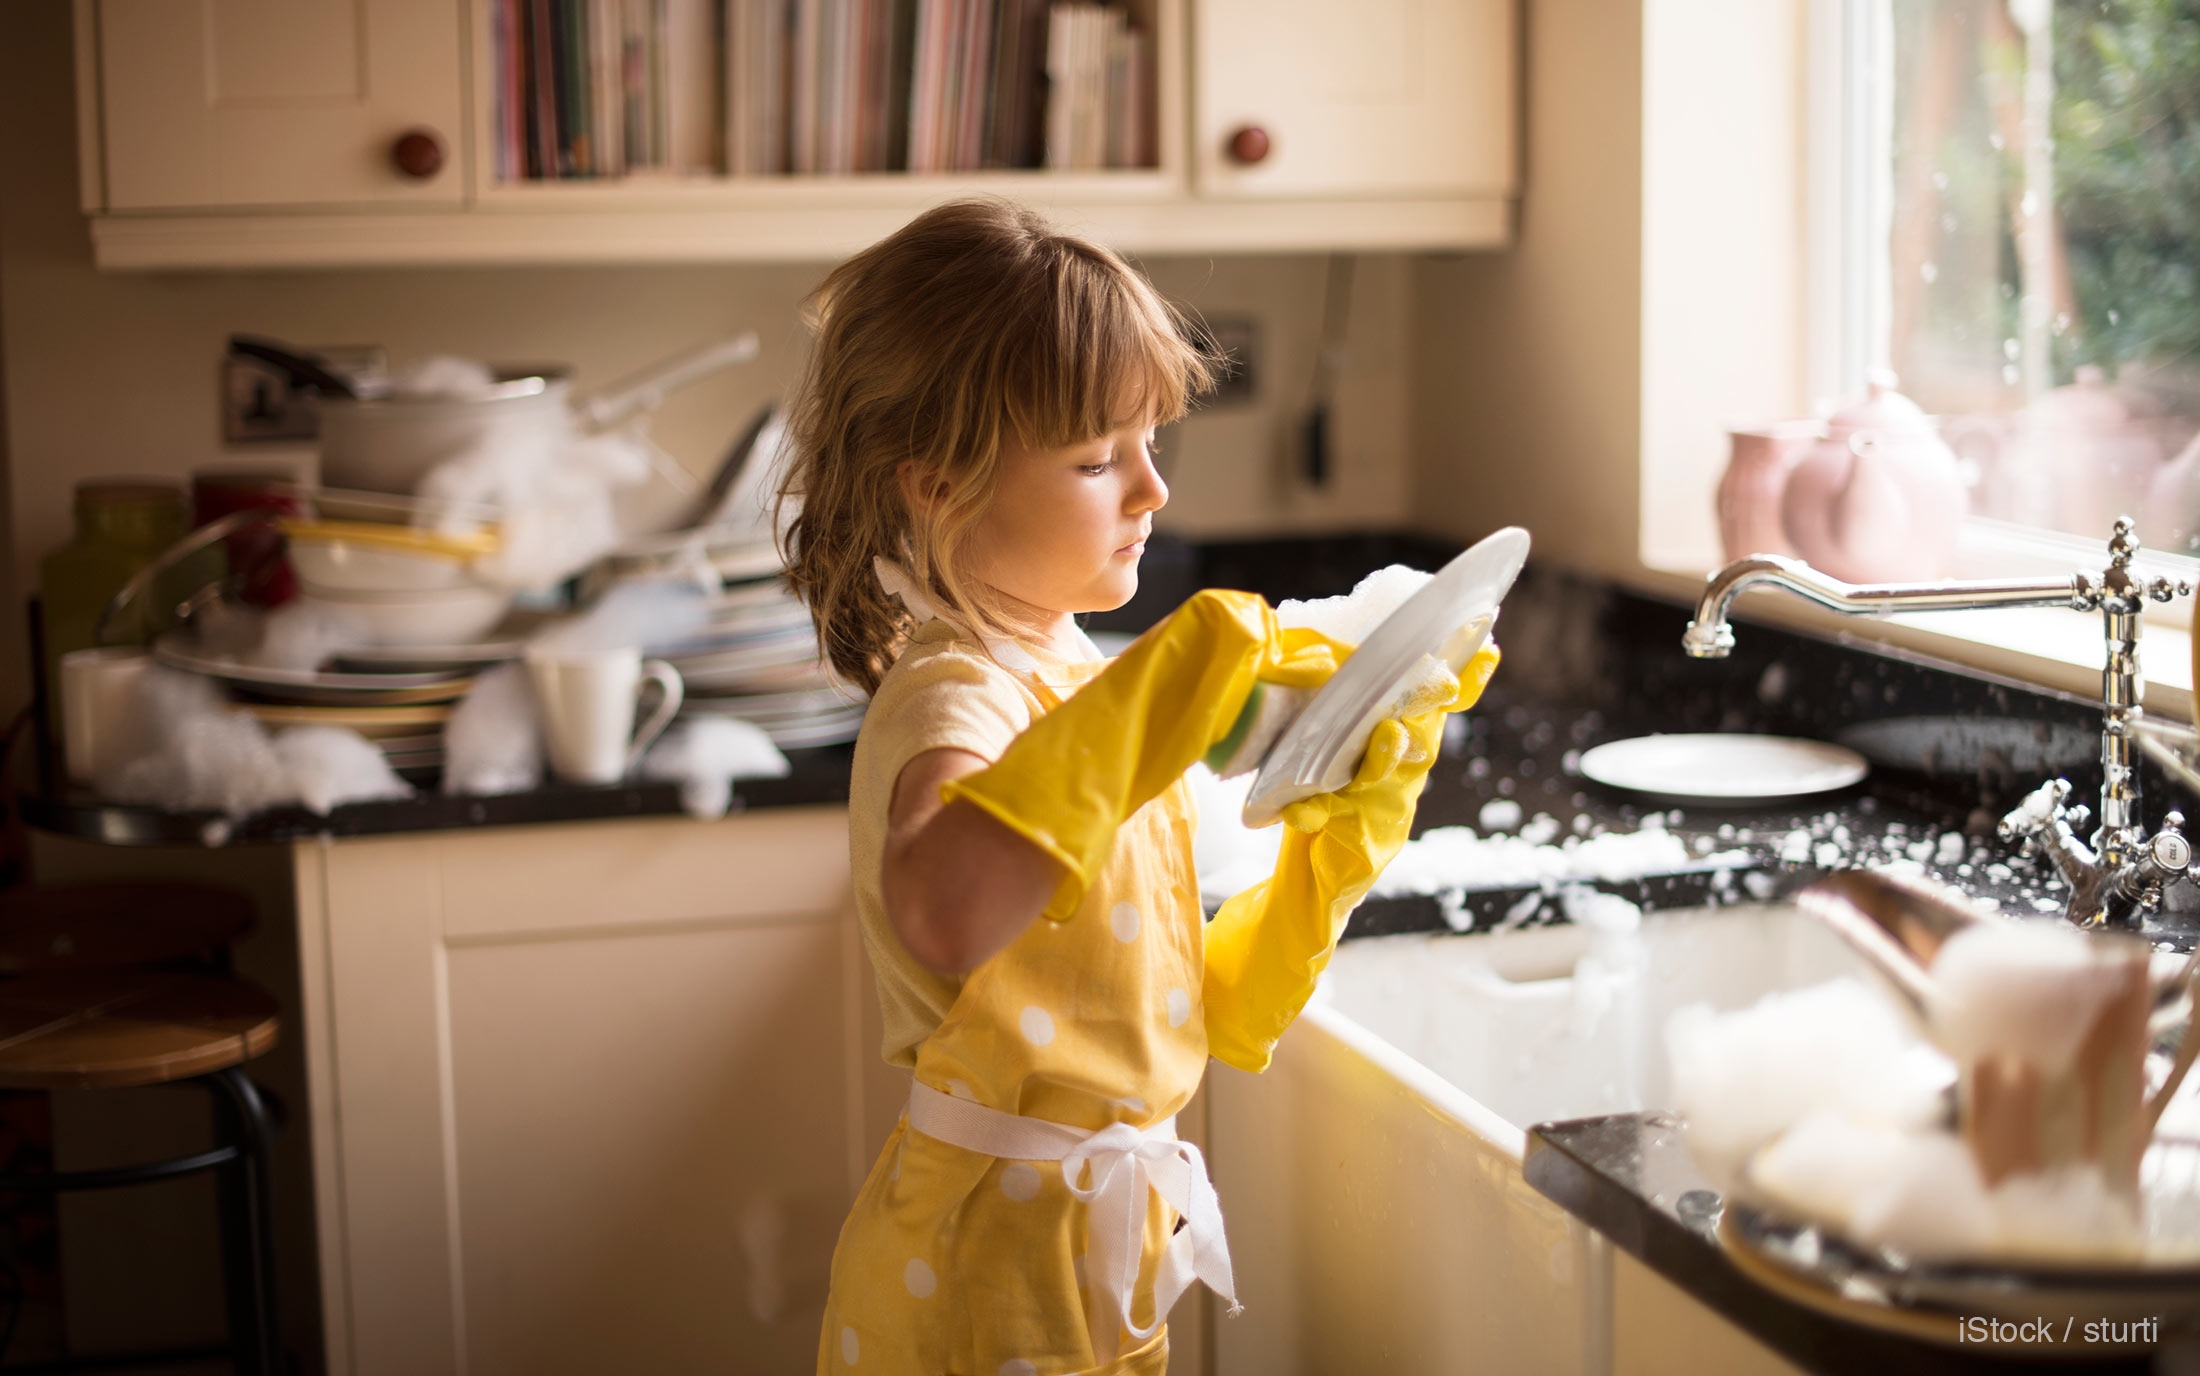 9 Chores Every Child Can Do to Earn Allowance | GOBankingRates